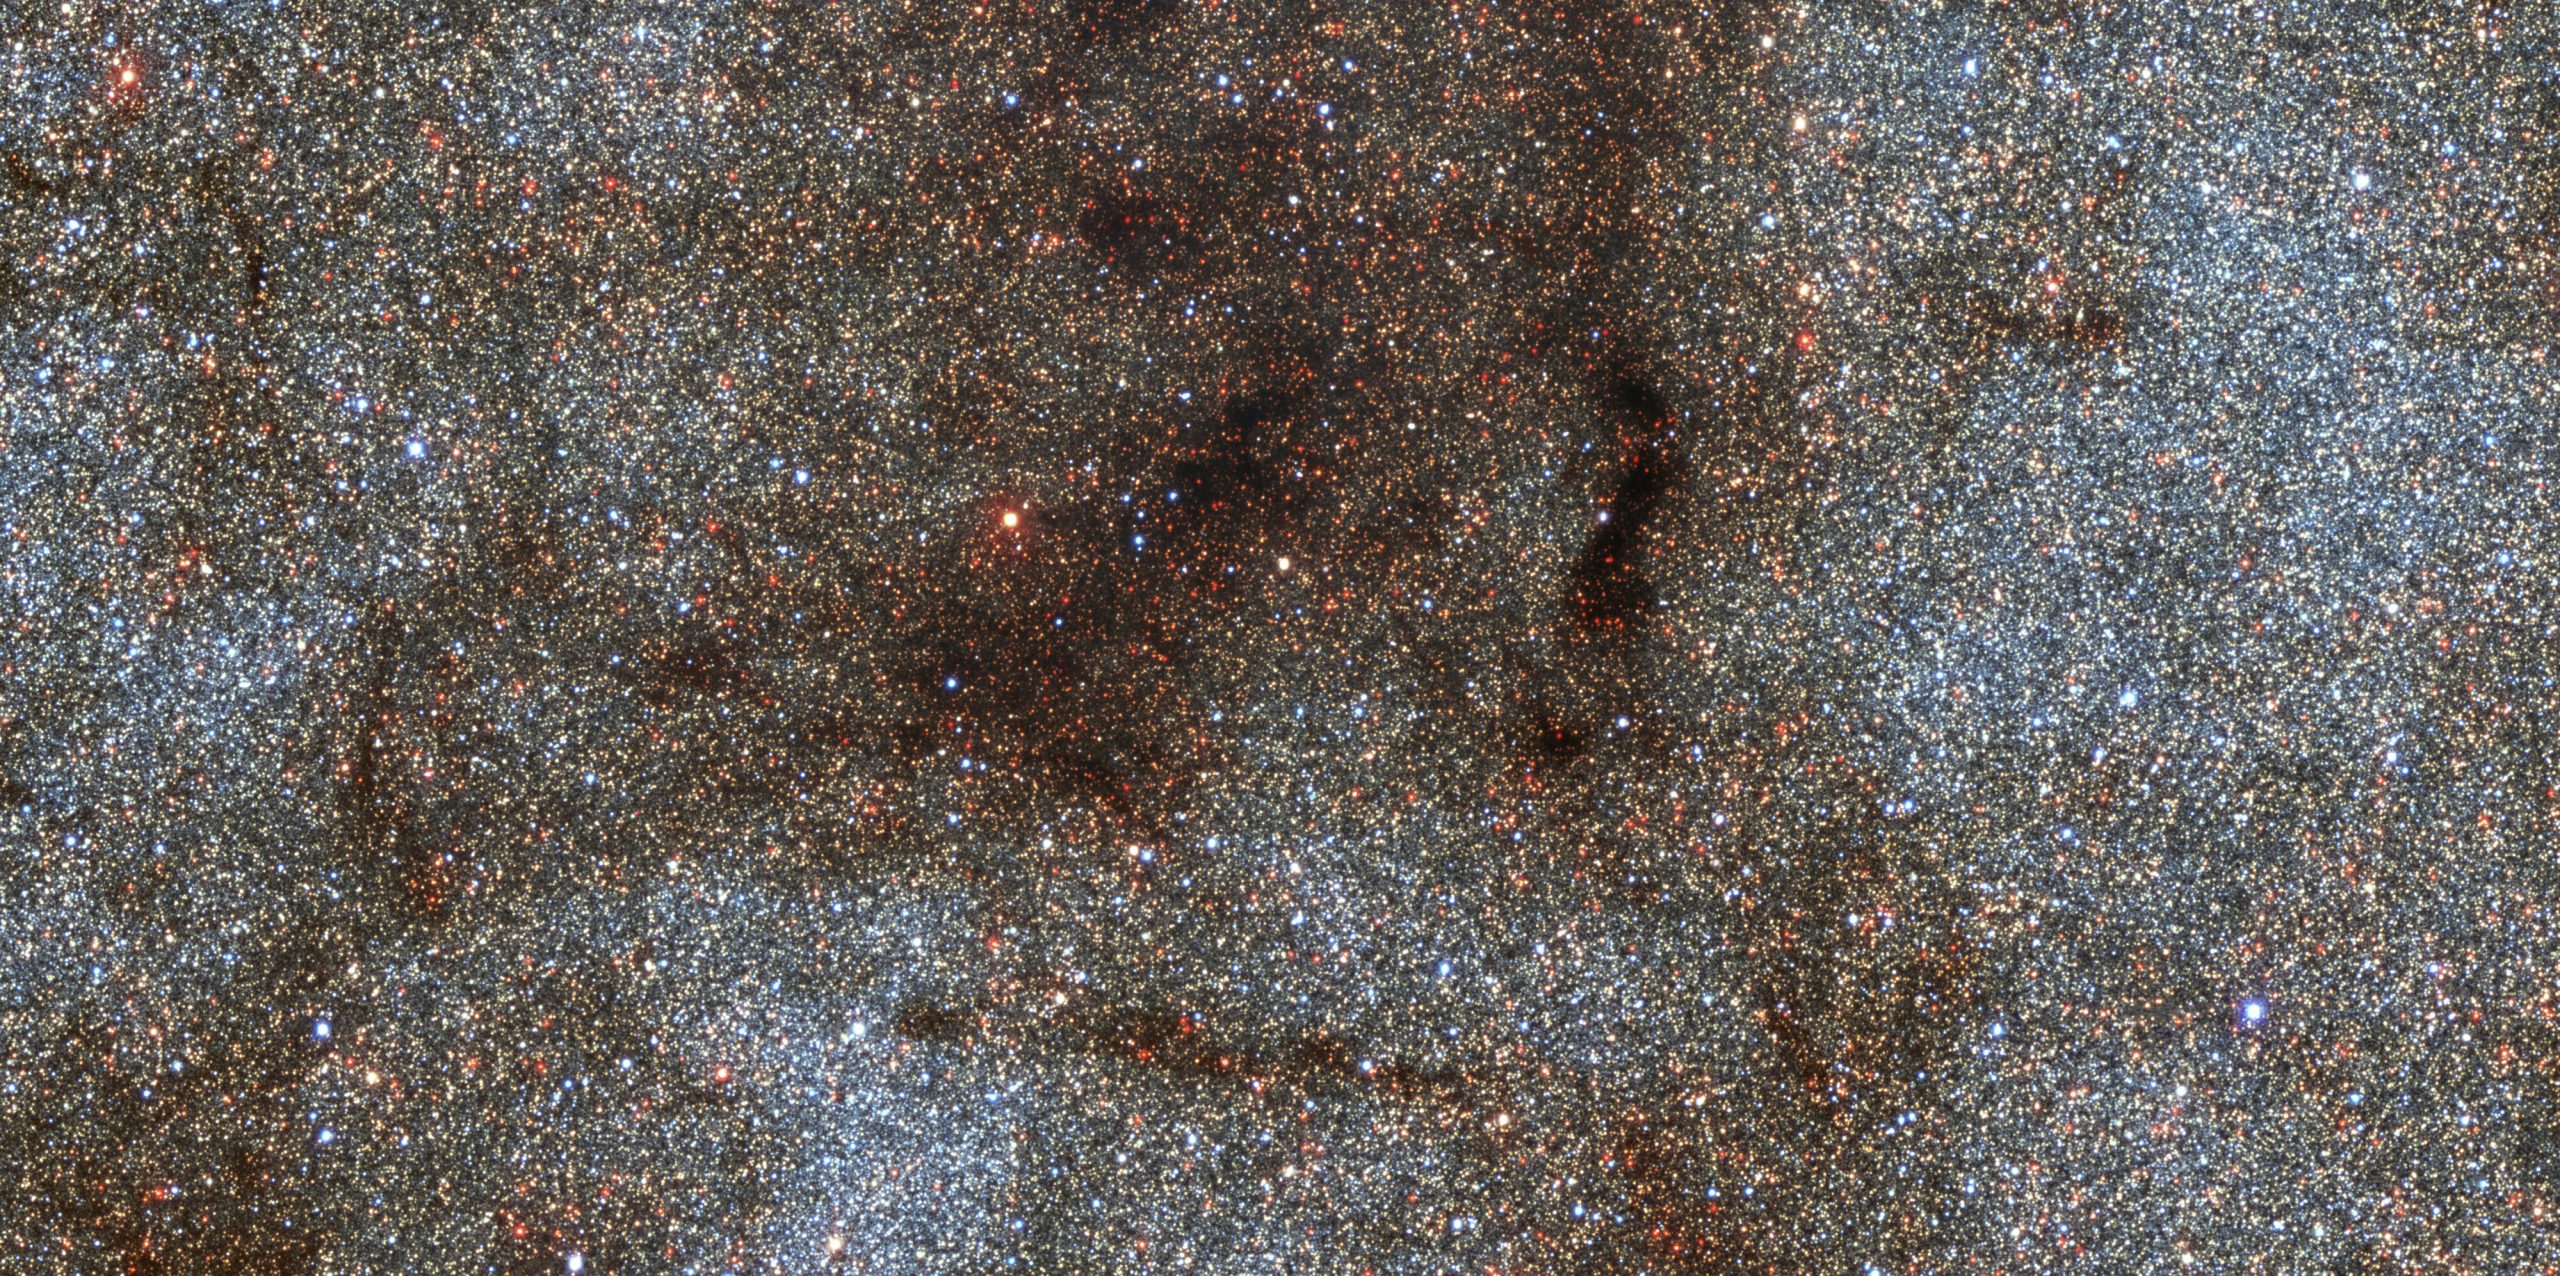 The center of the Milky Way showing hundreds of thousands of stars. Image Credit: CTIO/NOIRLab/DOE/NSF/AURA/STScI, W. Clarkson (UM-Dearborn), C. Johnson (STScI), and M. Rich (UCLA).